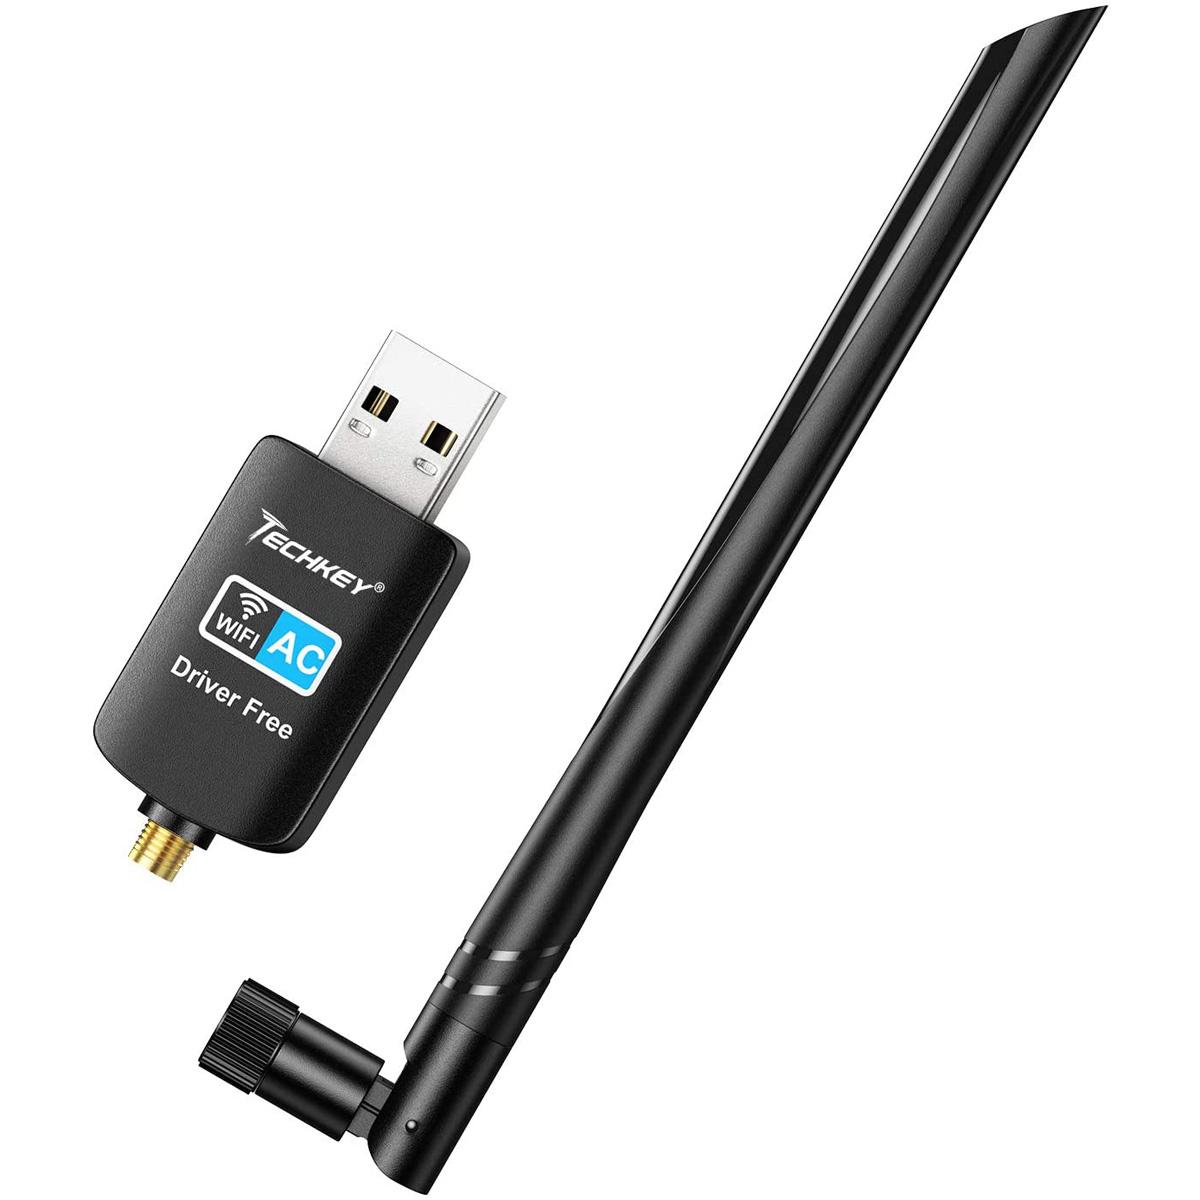 Techkey 600Mbps WiFi Dual Band USB Network Adapter for $6.49